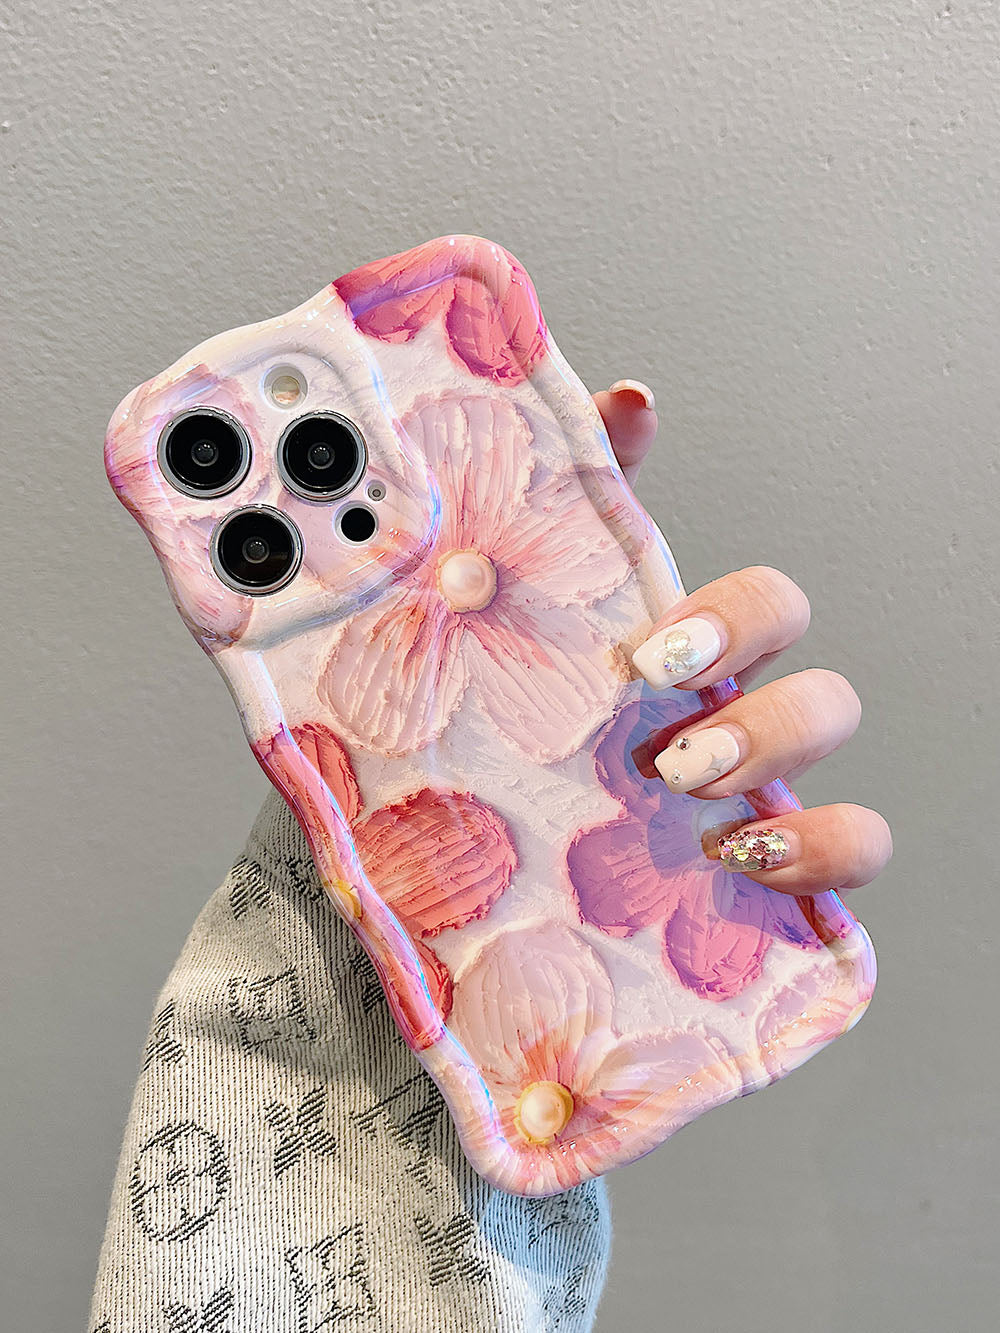 Luxurious Oil Painting Pink Rose Flower iPhone Case - {{ shop_name}} varyfun